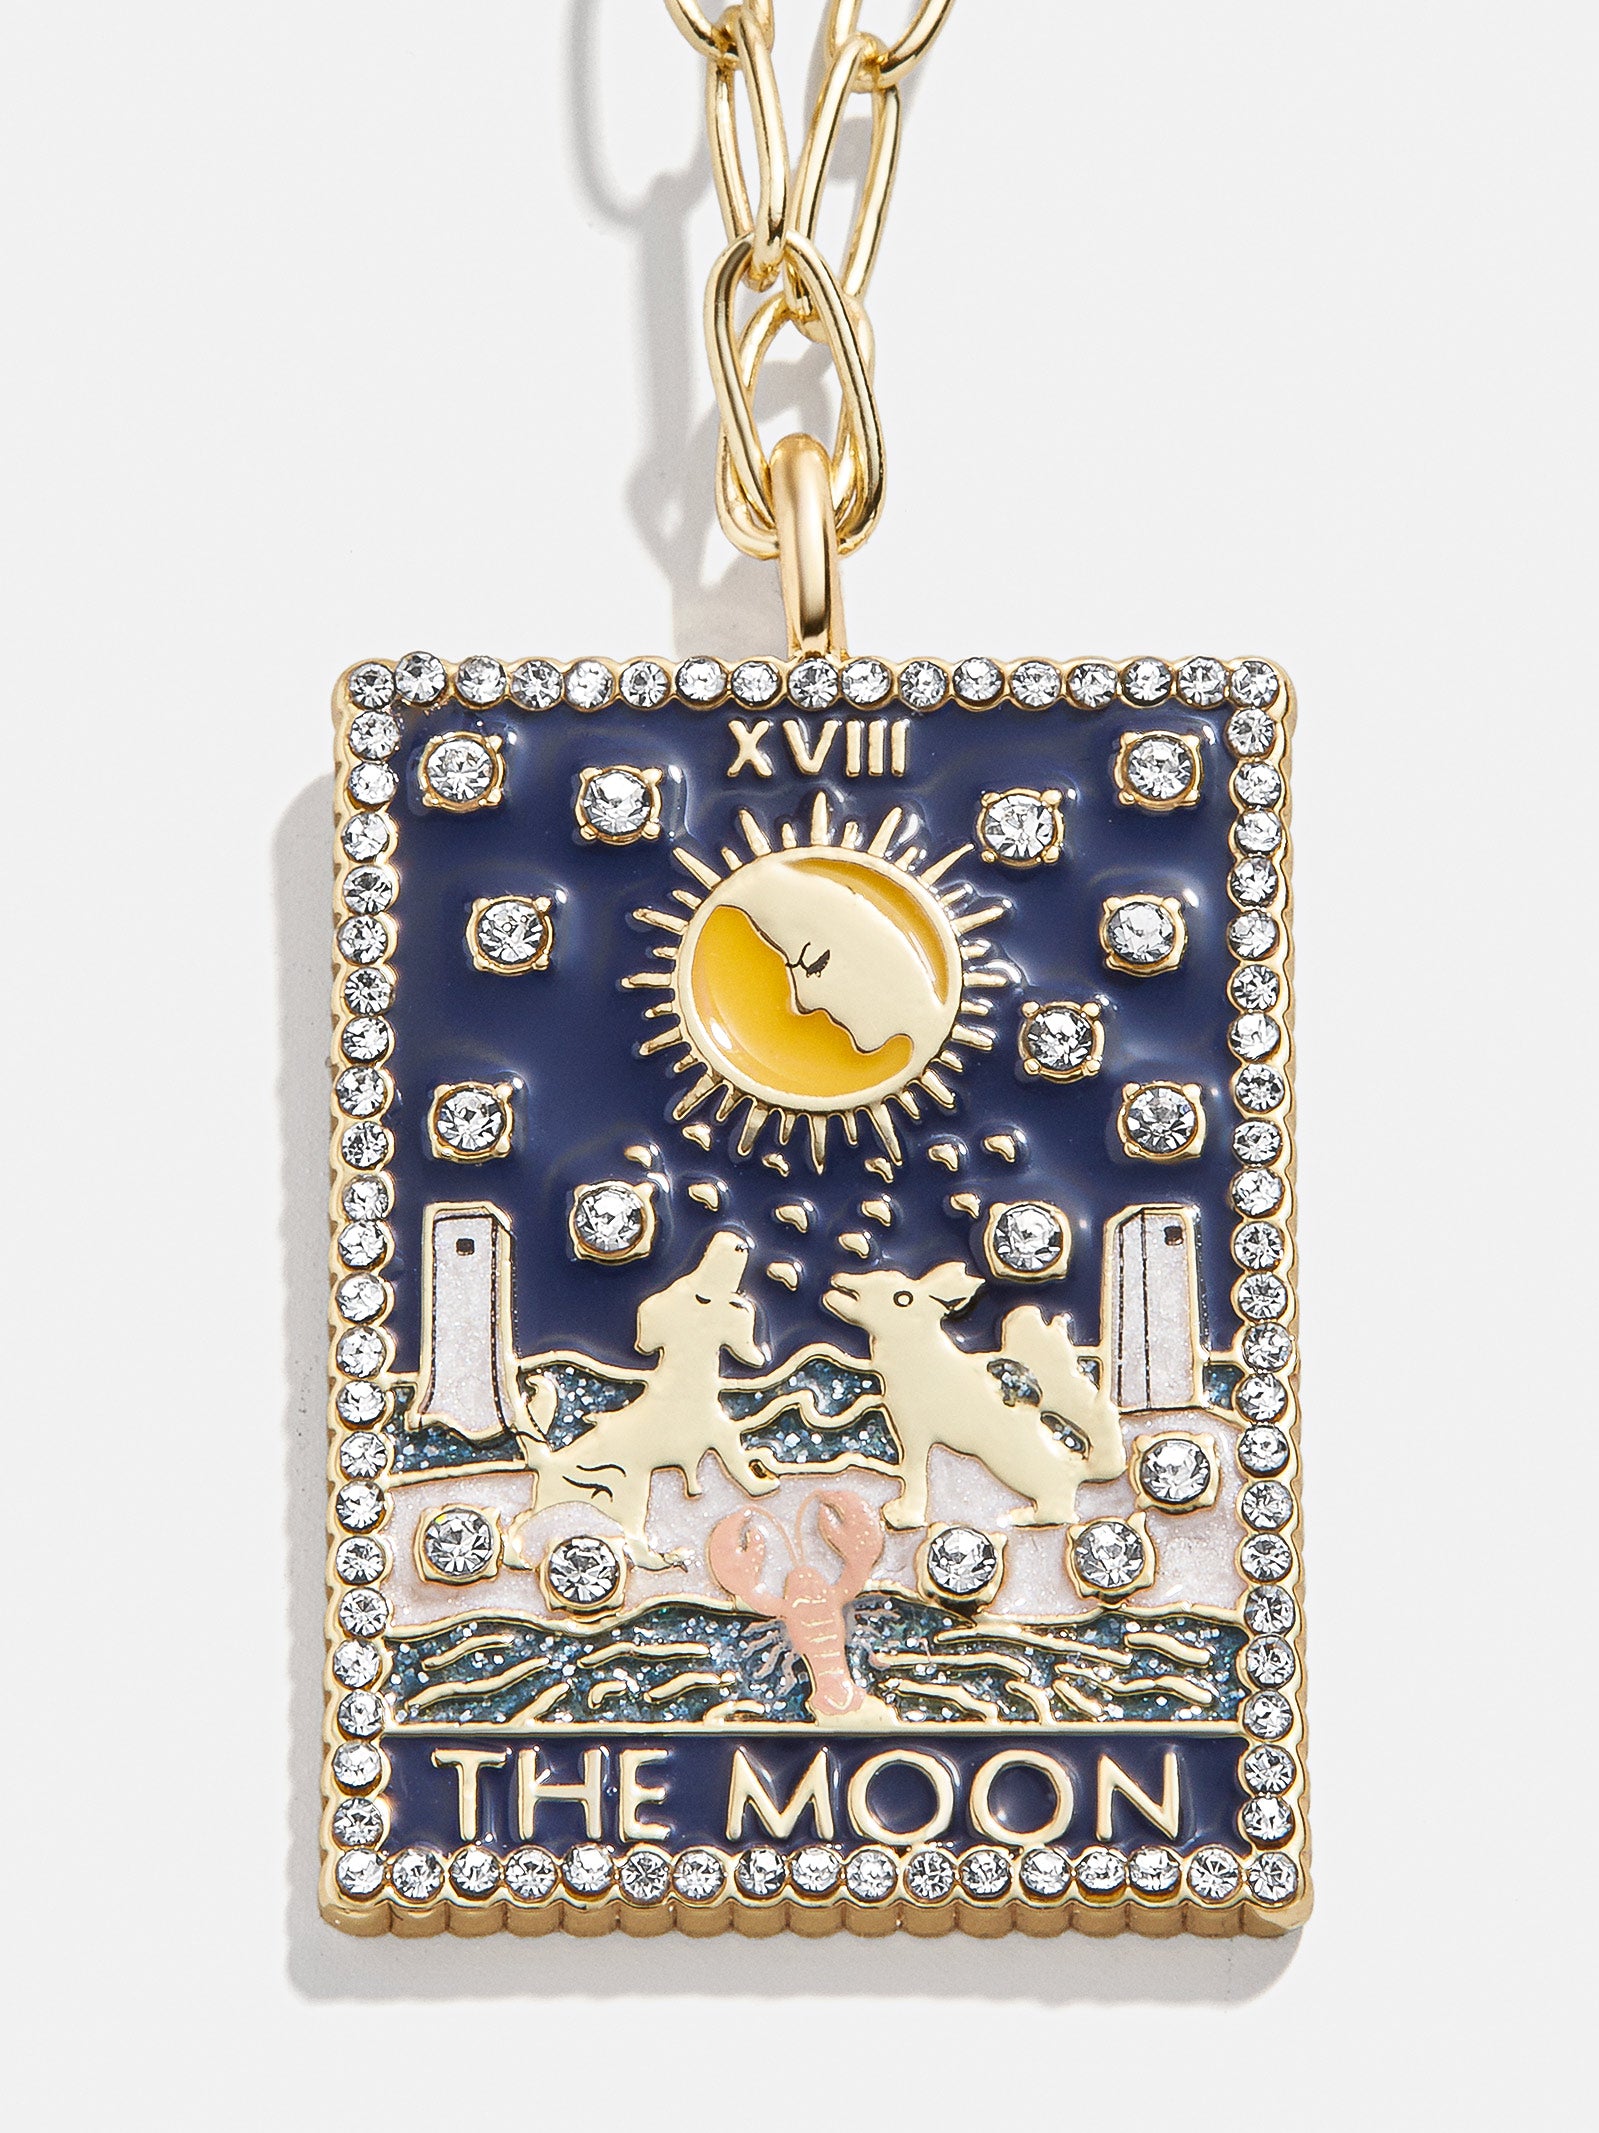 The Moon Tarot Card Meaning According to A. E. Waite